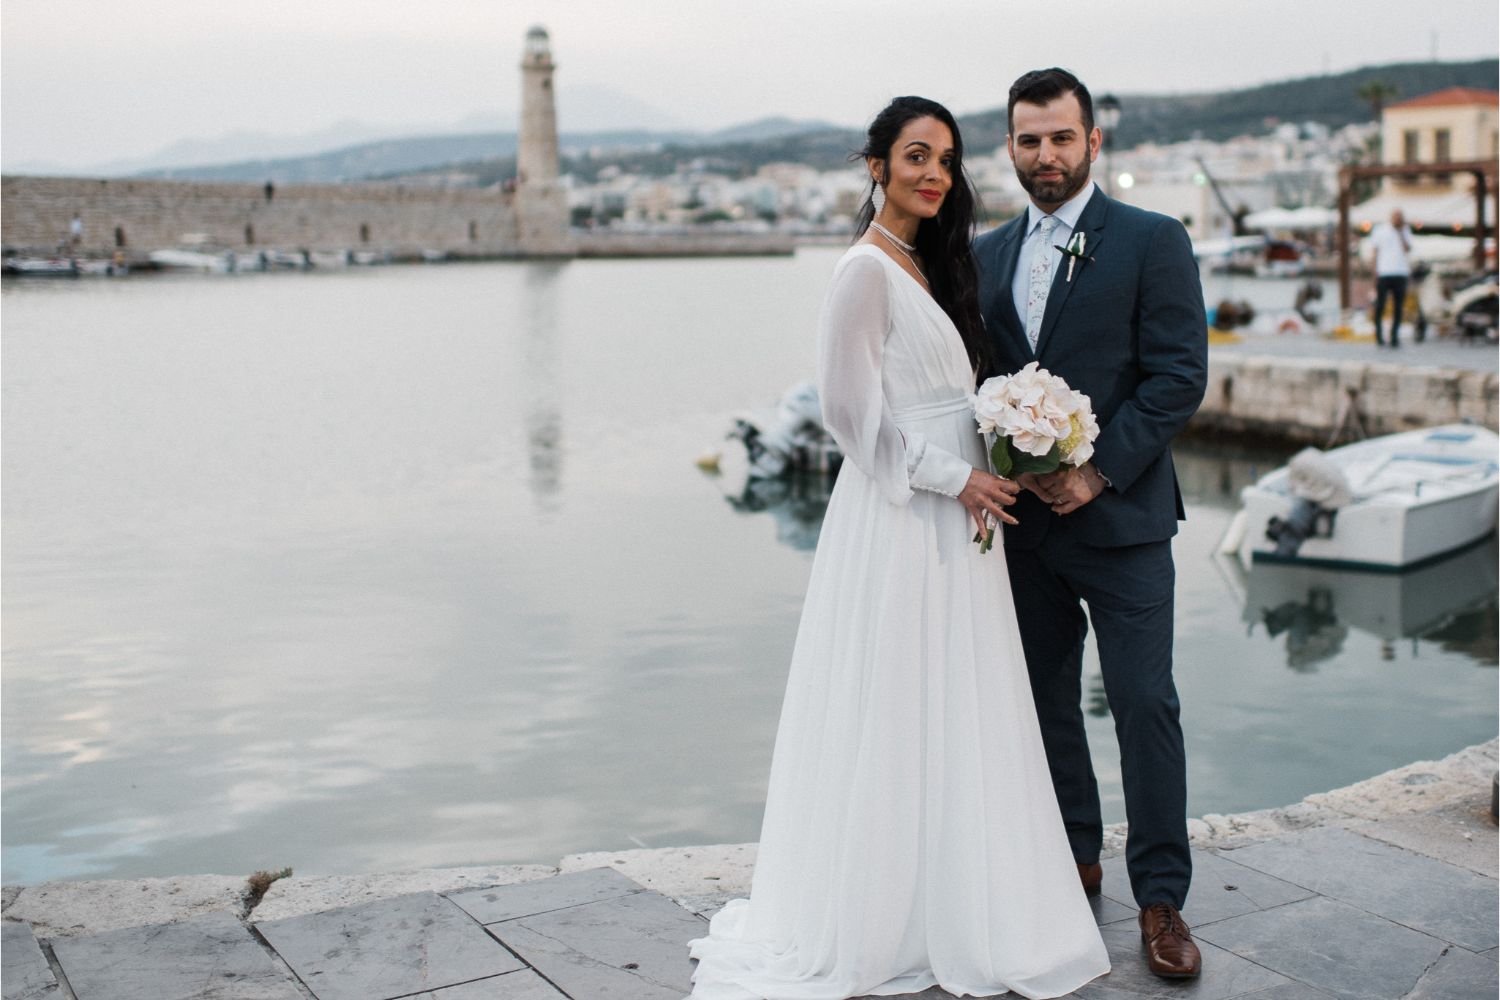 newlyweds photoshoot in Rethymno after private villa wedding in Crete